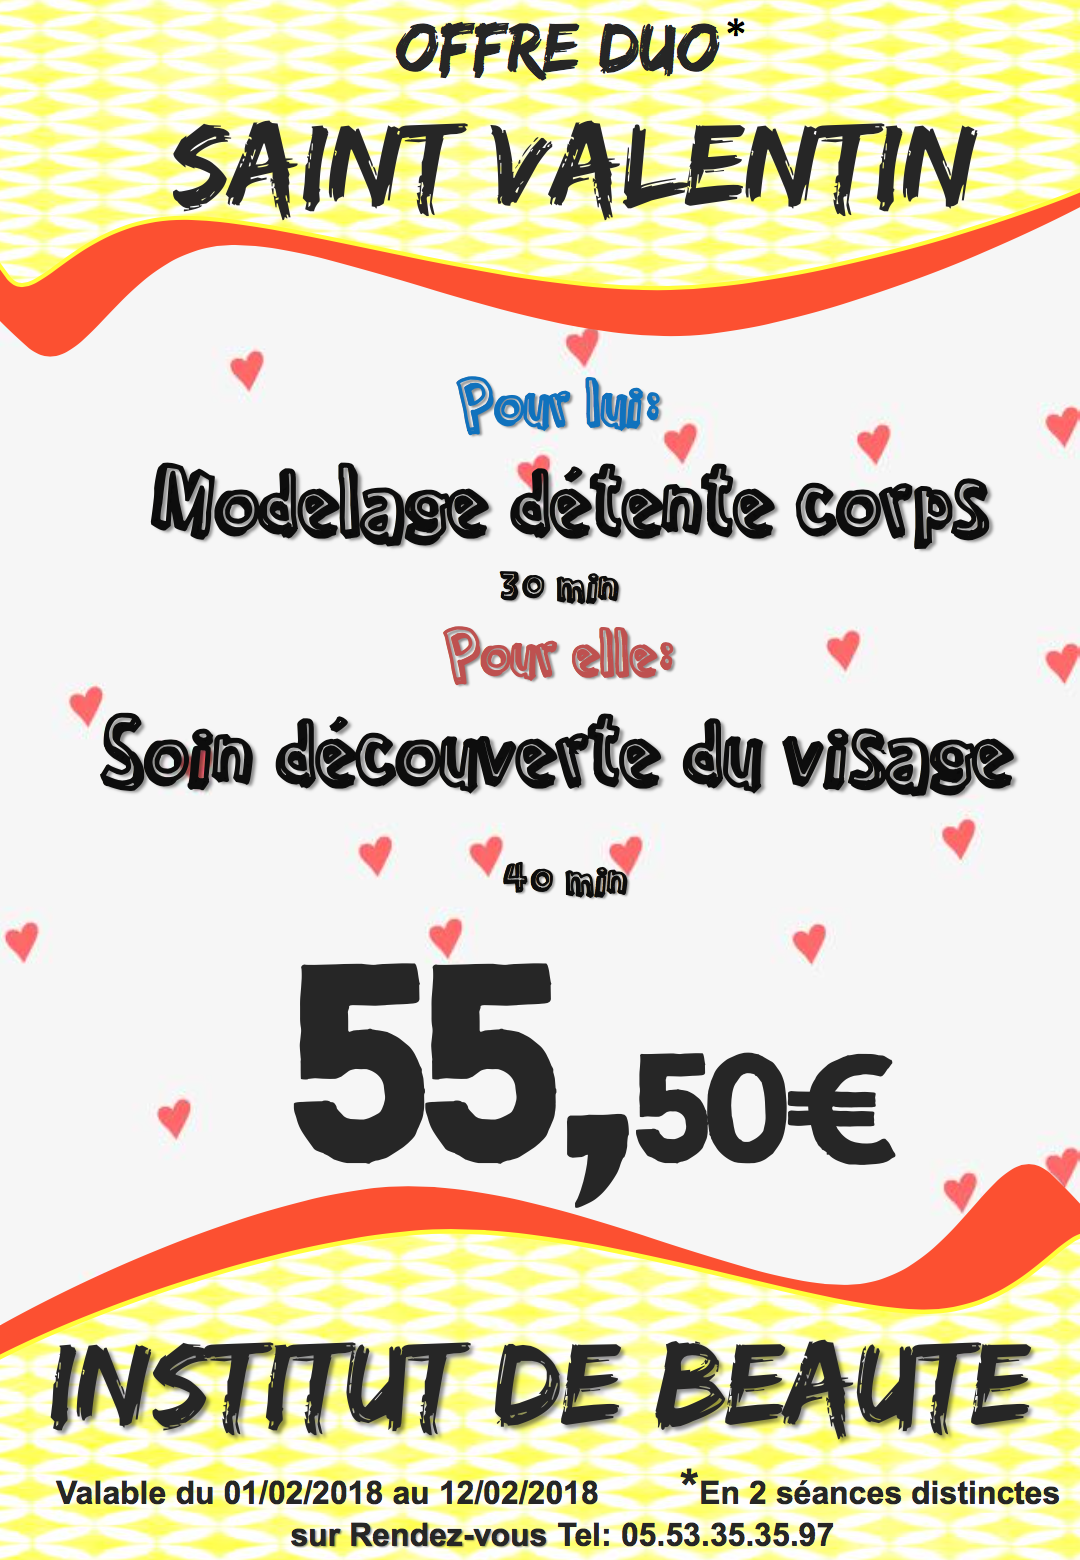 Offre Duo St-Valentin ! 